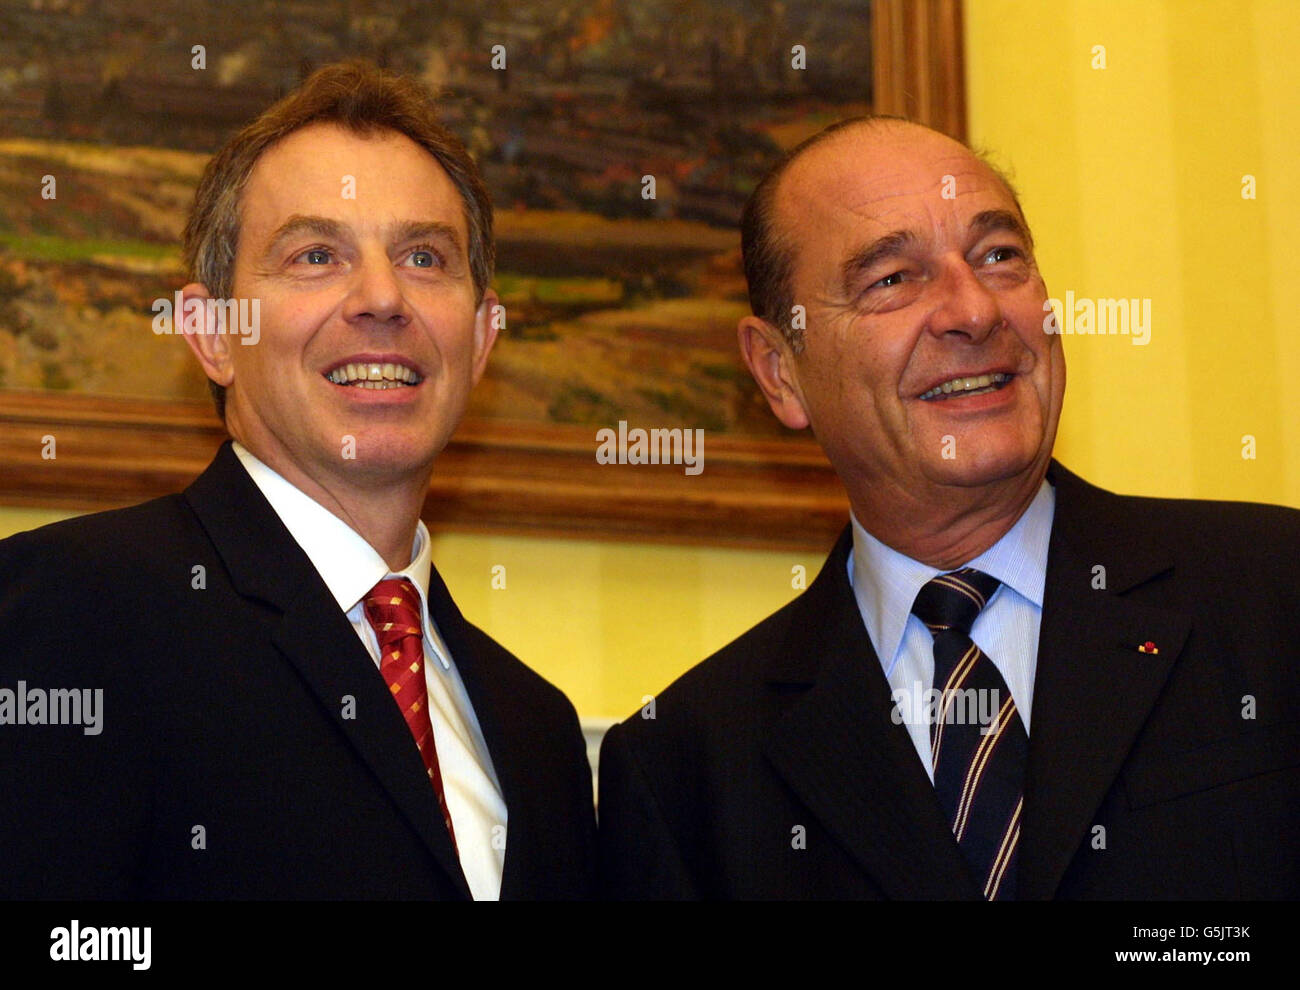 Britain's Prime Minister Tony Blair poses with French President Jacques Chirac at No. 10 Downing Street in London. The French President, who celebrates his 69th birthday, was meeting Blair as part of an Anglo-French summit. Stock Photo